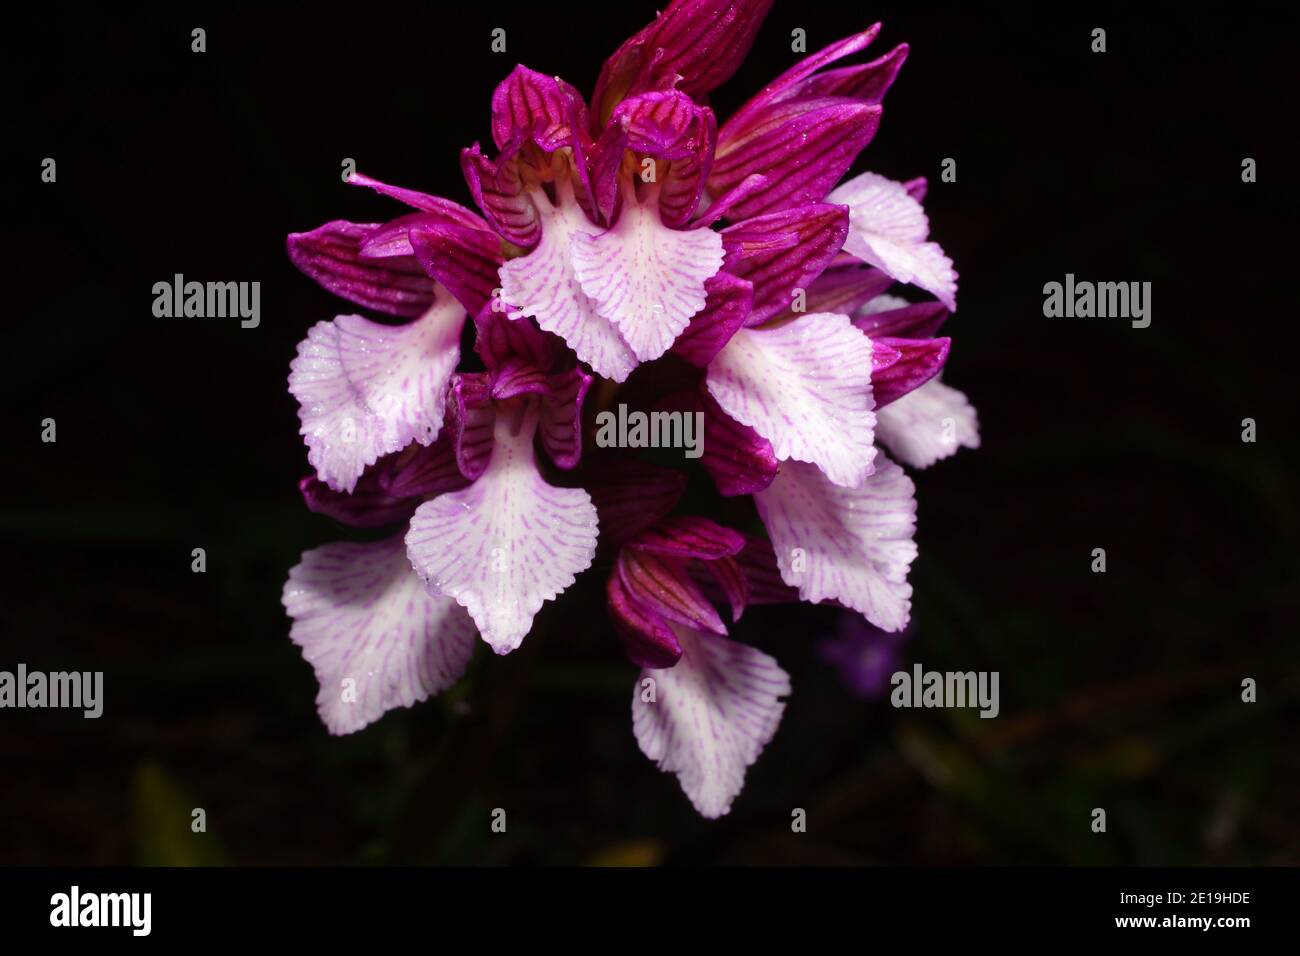 Purple and white flower of Orchis papilionacea, the butterfly orchid, on Crete in Greece, frontal view with black background Stock Photo